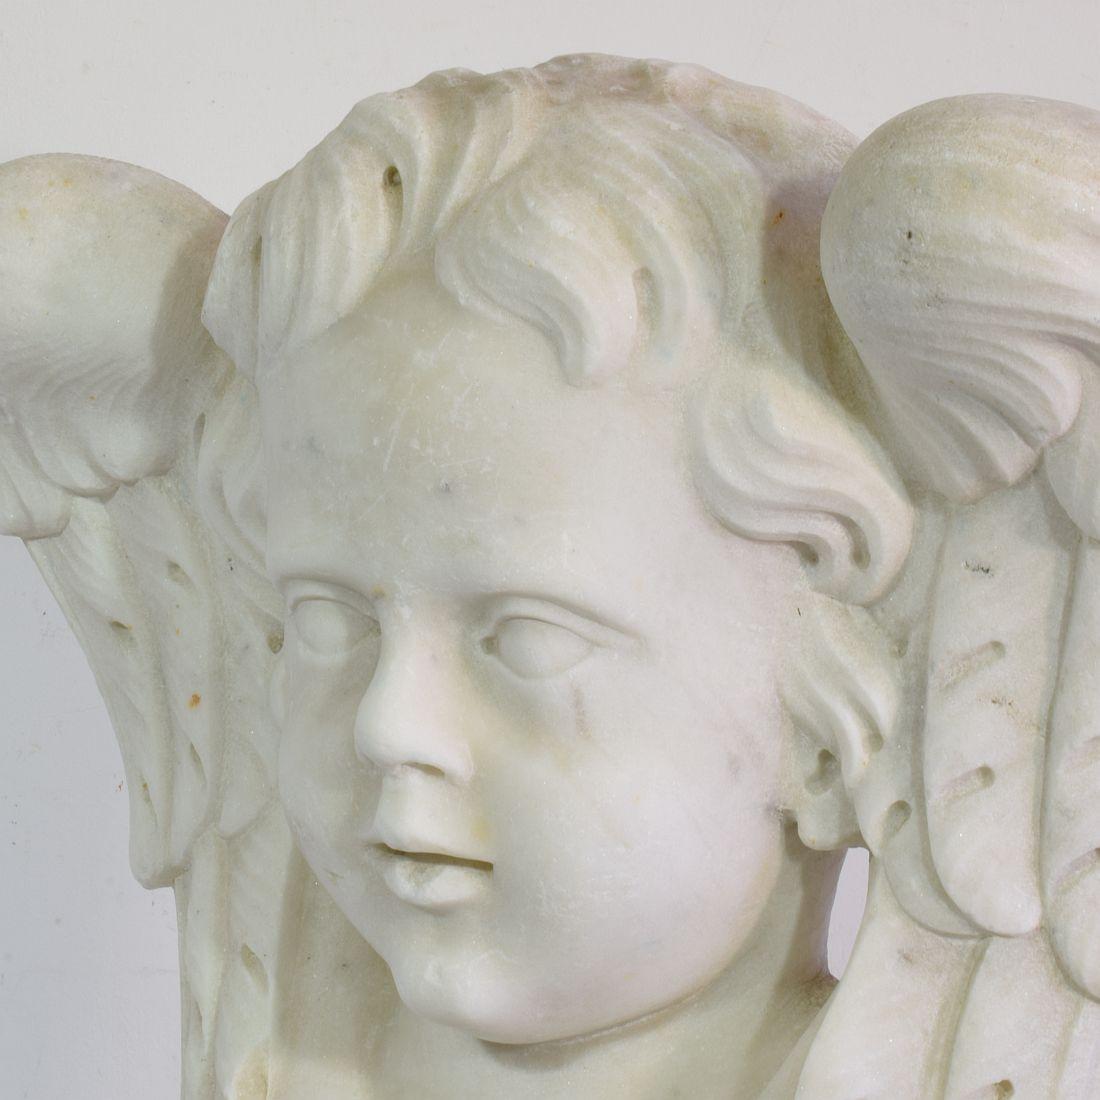 Italian, 17th / 18th Century Carved White Marble Winged Angel Head Ornament For Sale 1